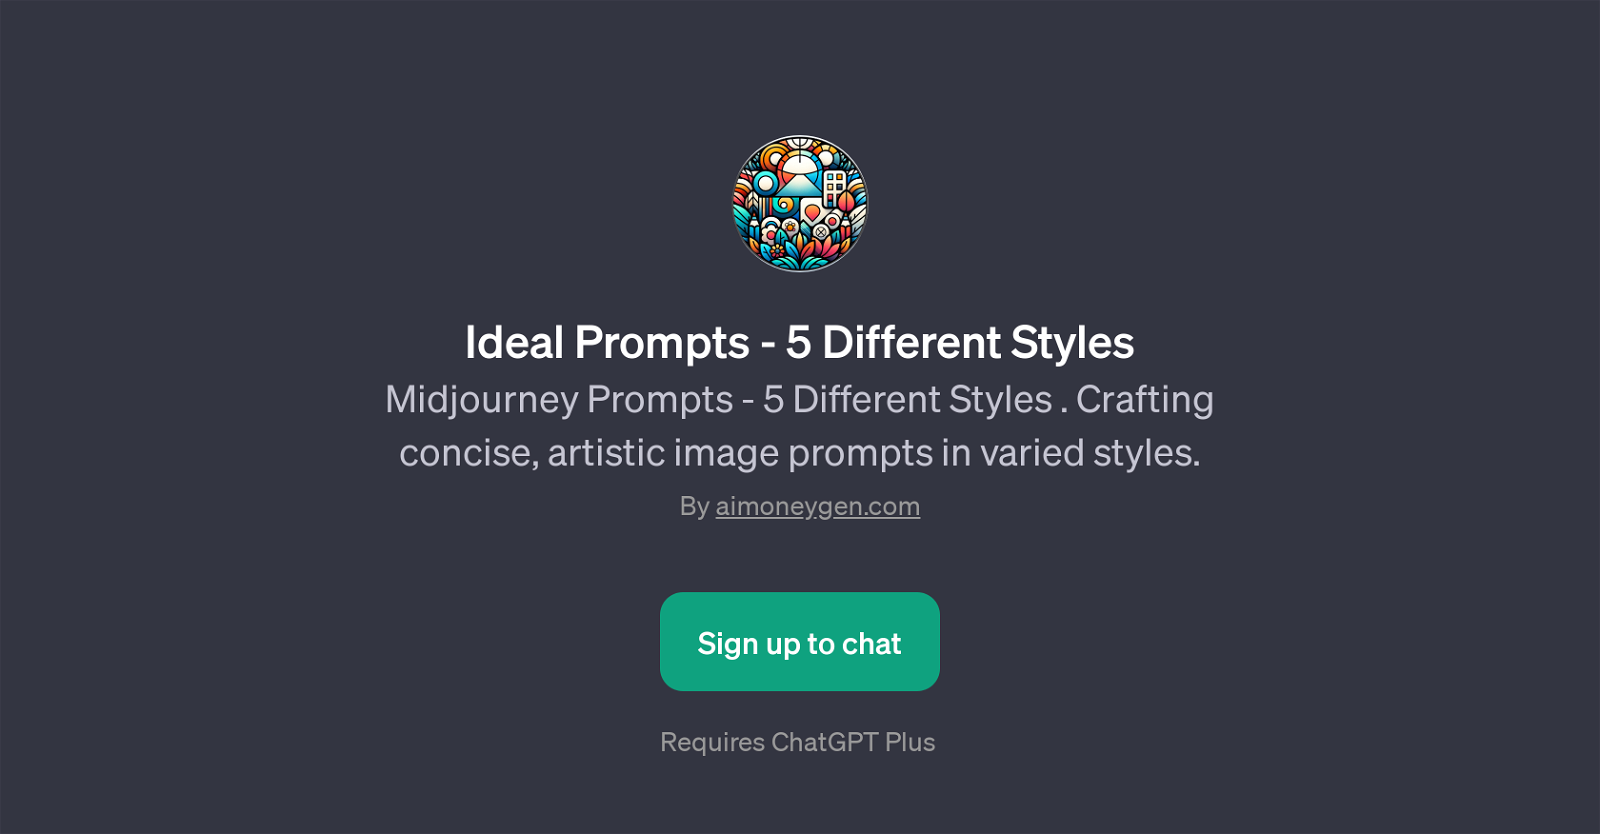 Ideal Prompts - 5 Different Styles website